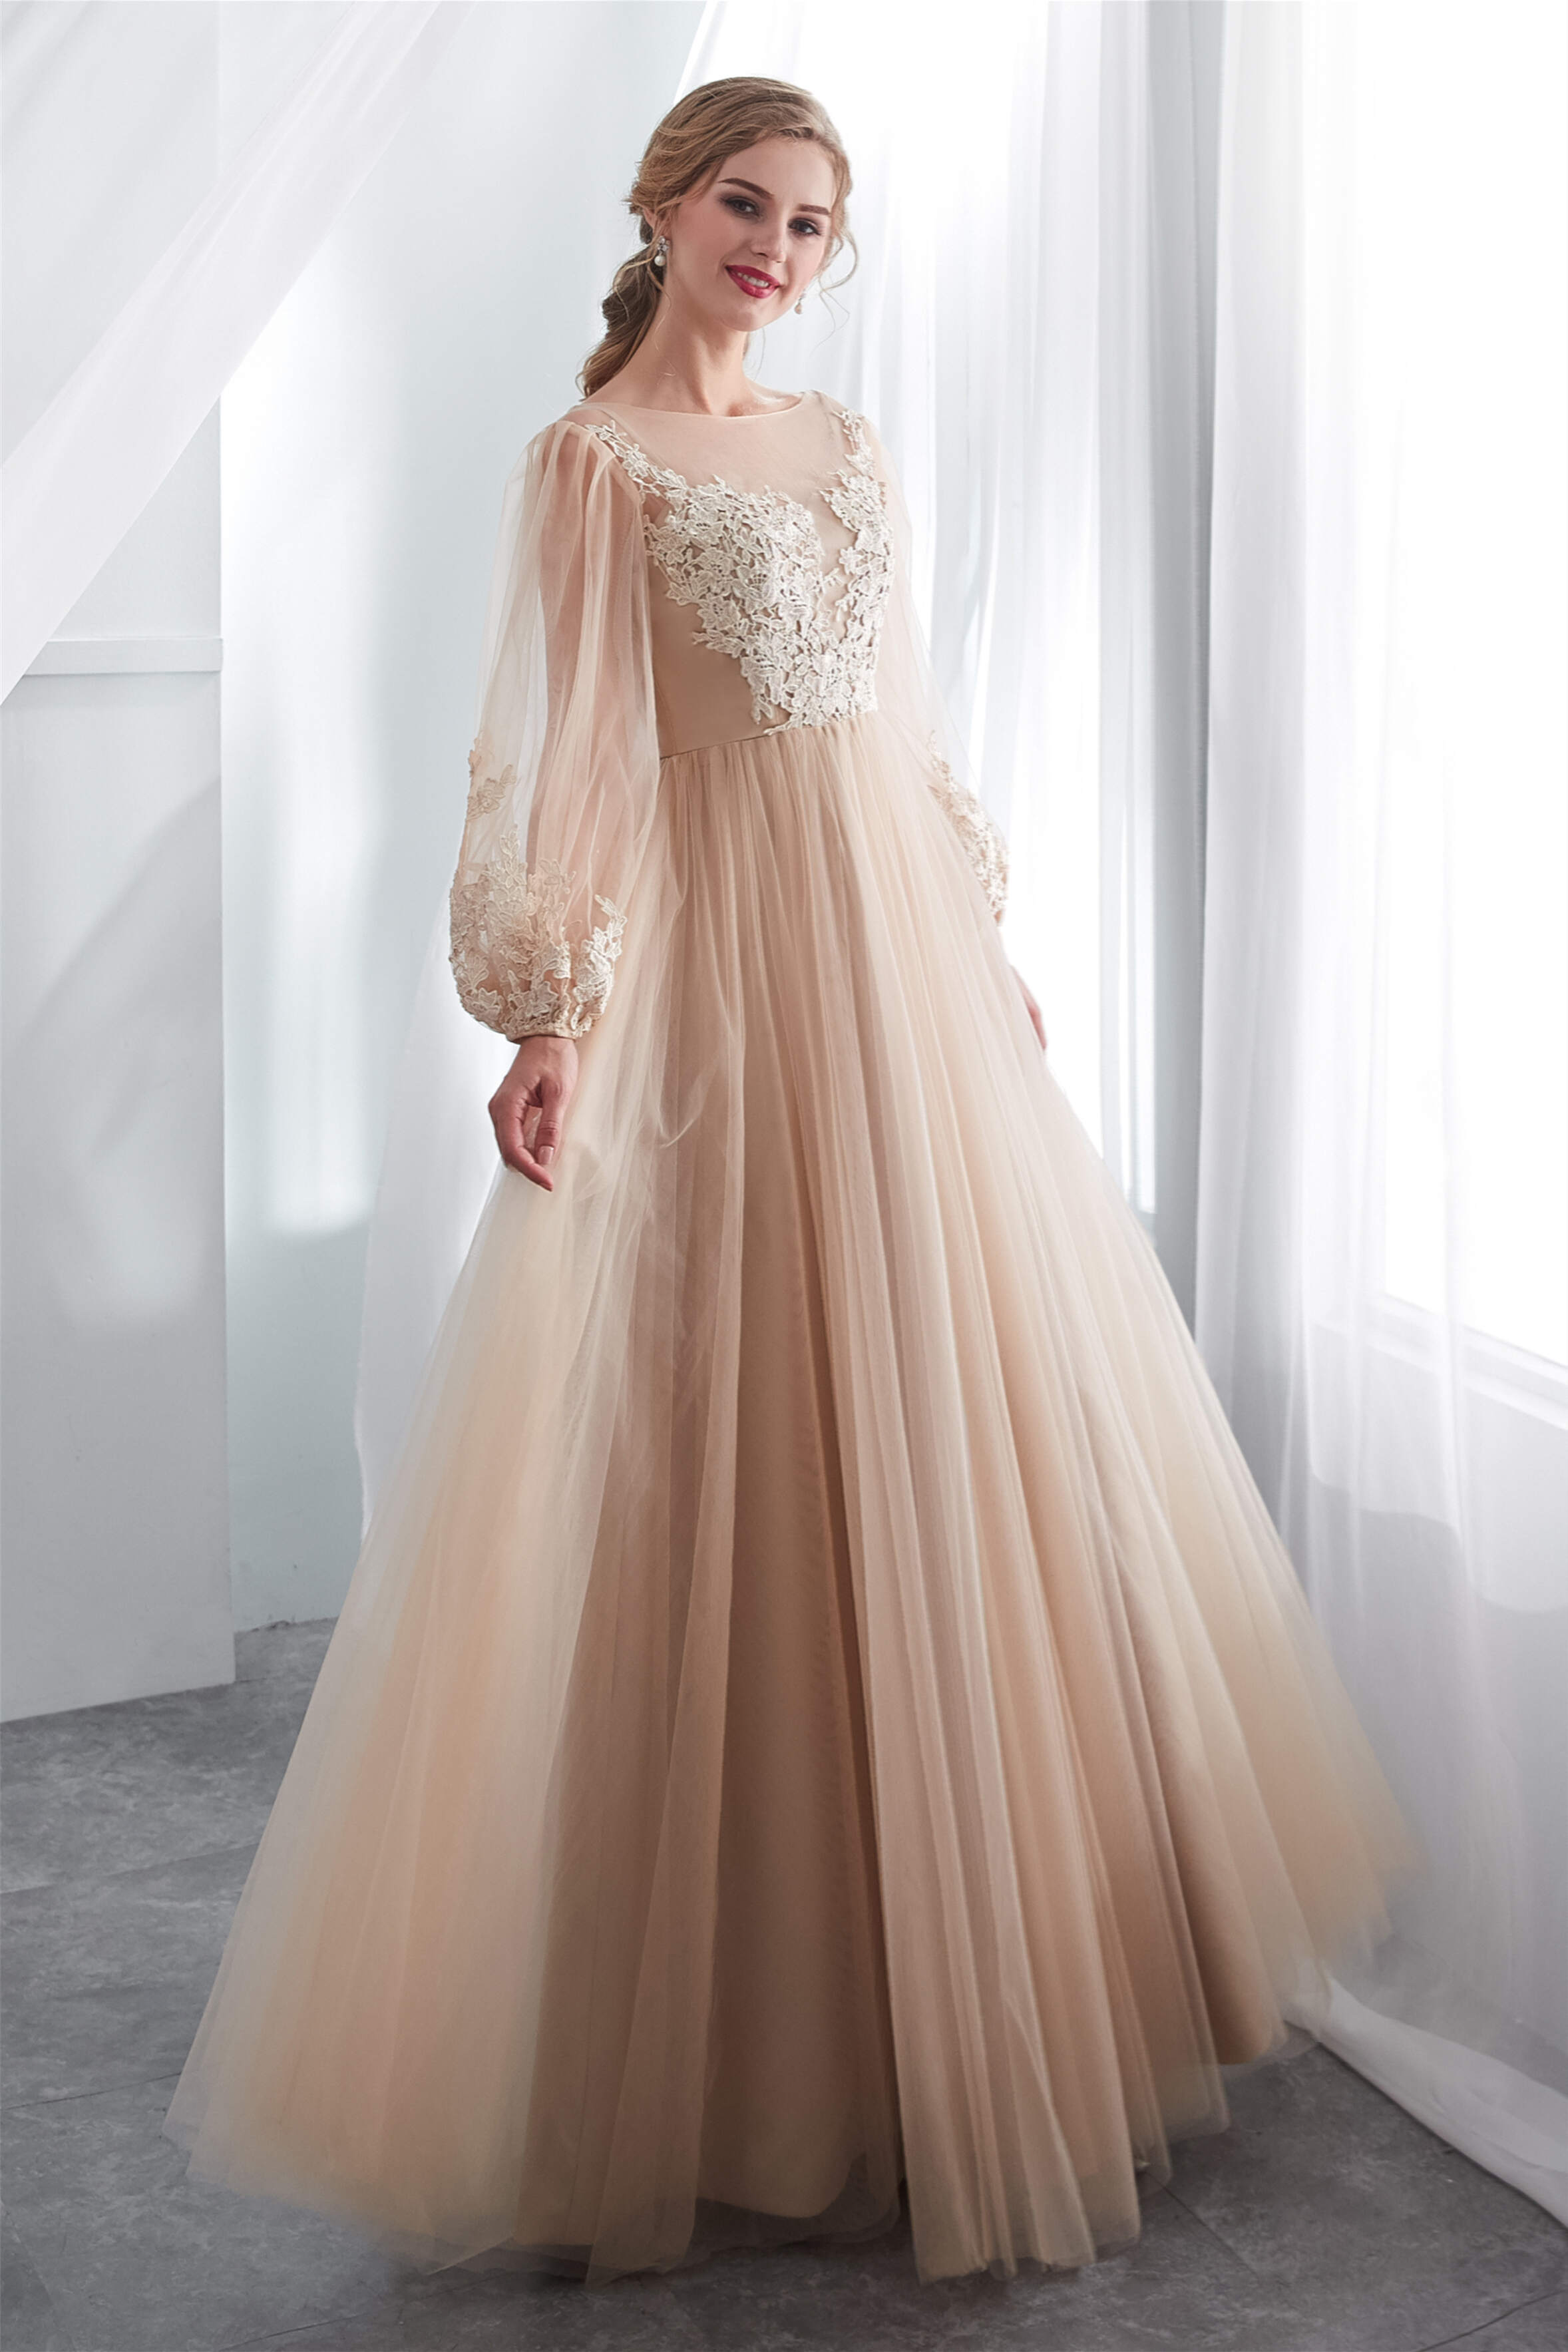 Formal Dresses For Large Ladies, Lantern Sleeve Champagne Appliques Long Prom Dresses